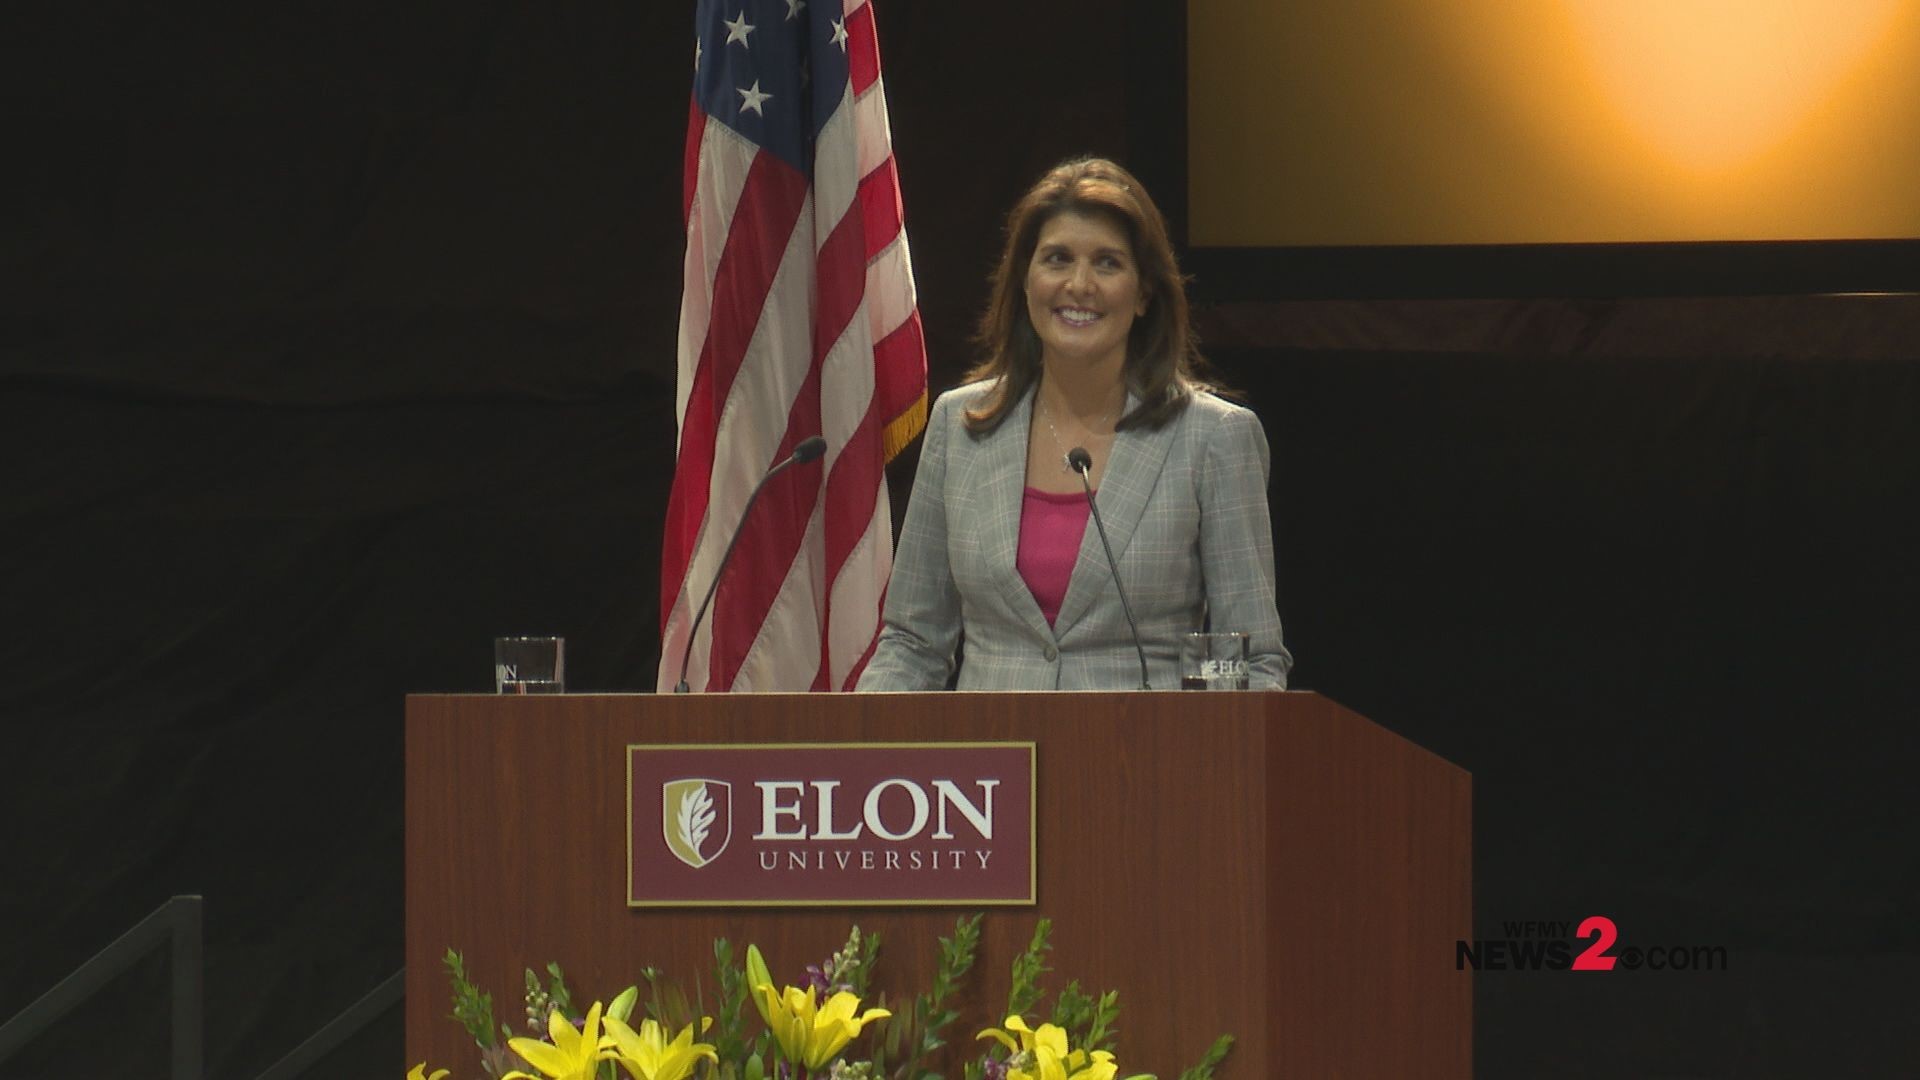 Nikki Haley told Elon University students she learned to focus on the similarities between people, not the differences.